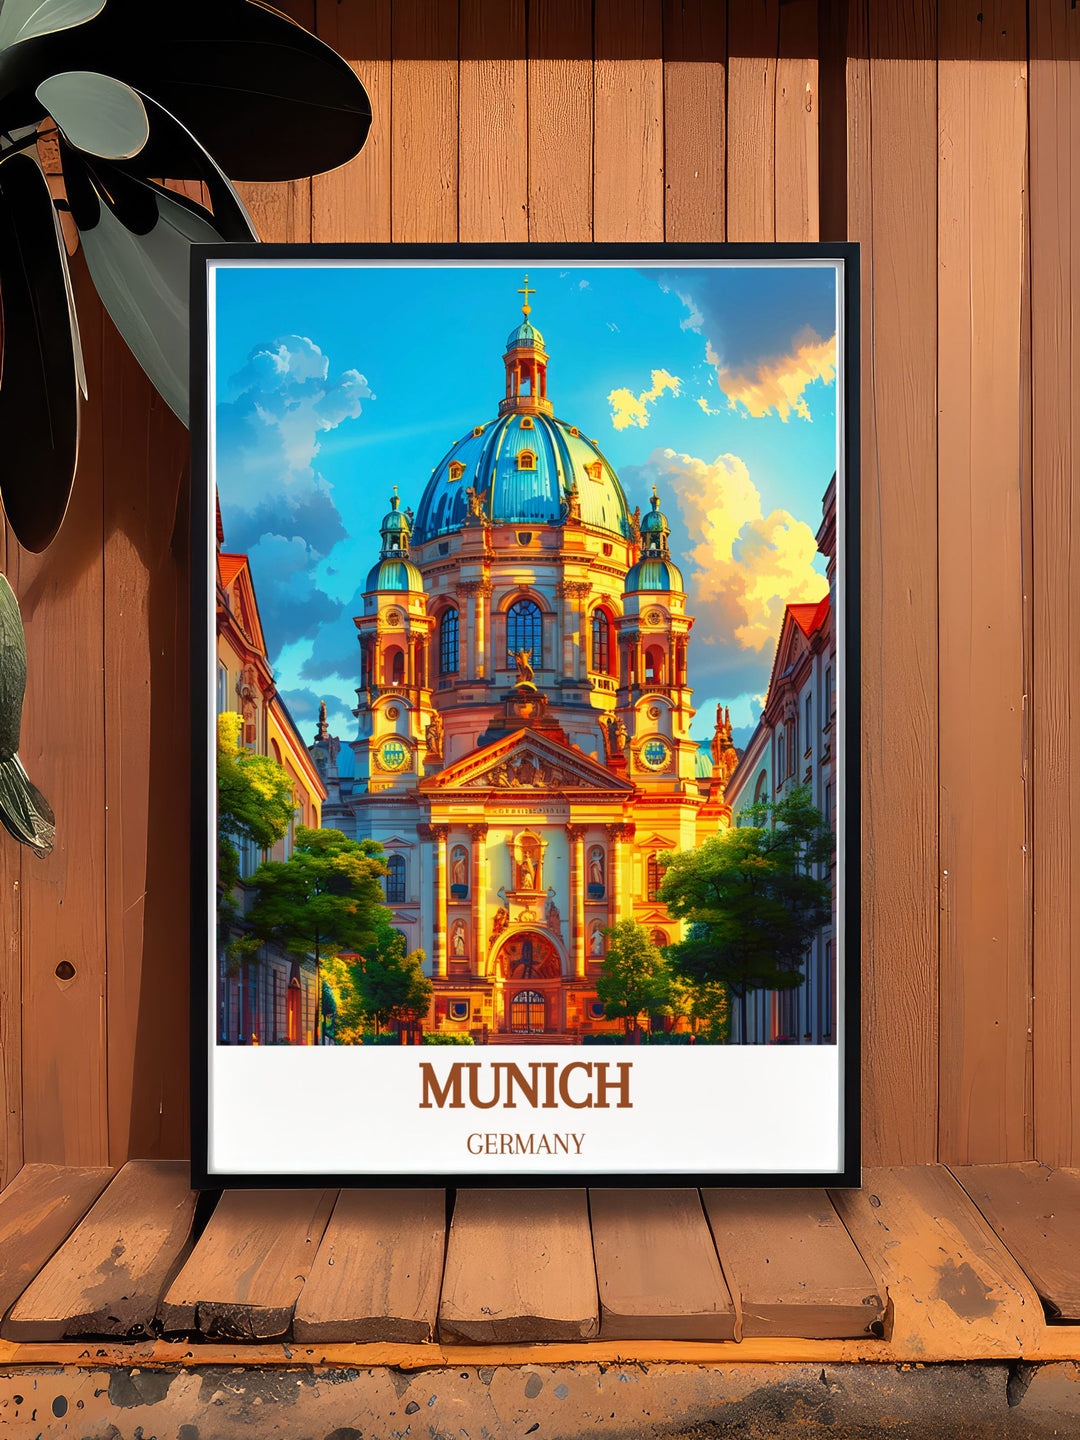 Timeless Munich Art Print featuring GERMANY Frauenkirche Dresden brings Munichs beauty into your home perfect for those who have traveled to Munich or dream of visiting adds a touch of elegance and history to your Germany wall art collection ideal for gifting